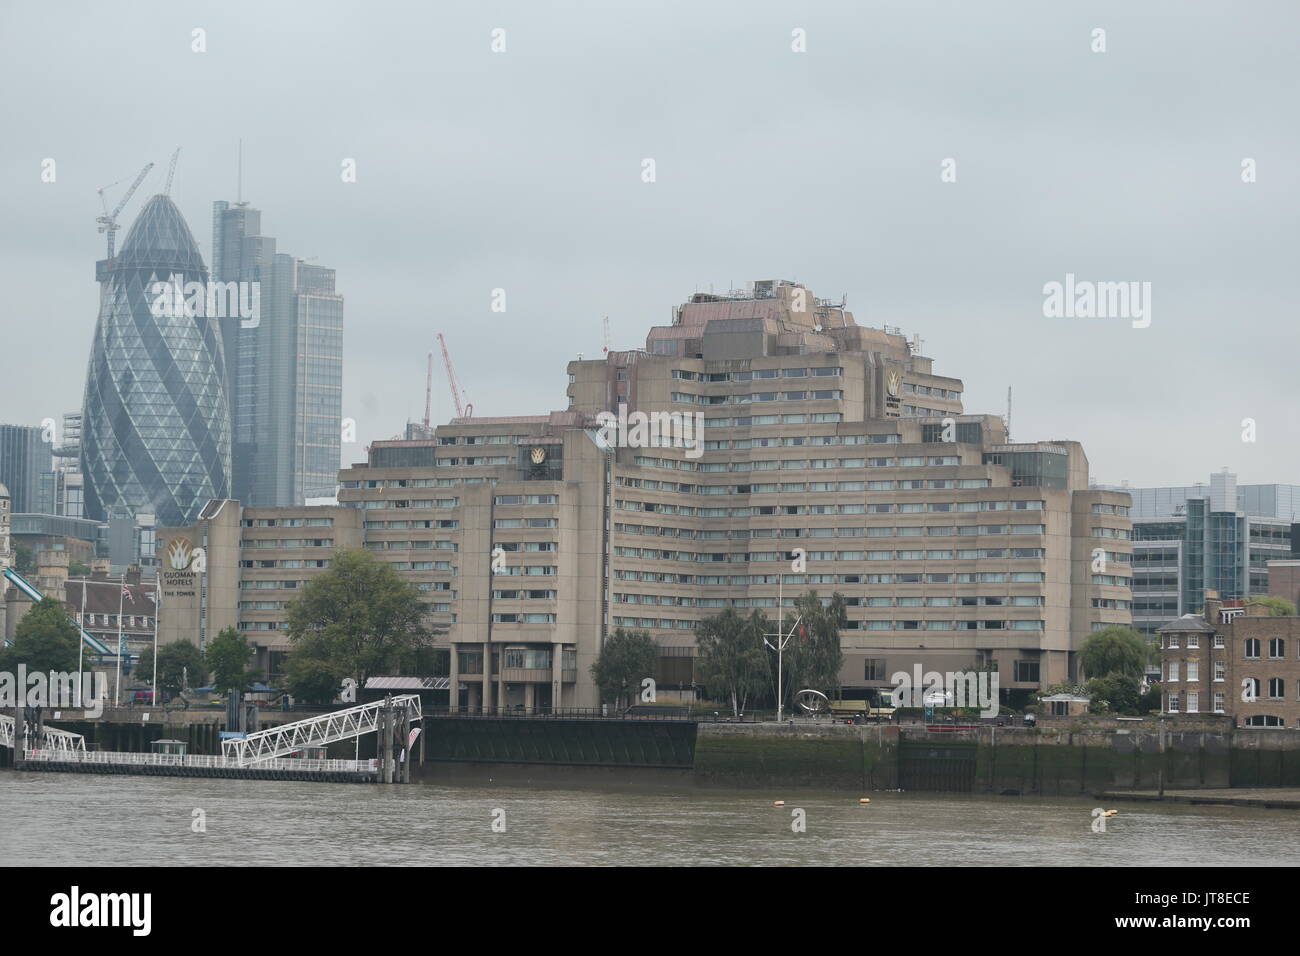 London, UK. 08th Aug, 2017. Gouman Hotels The Tower It has been confirmed by the IAAF that a vomiting bug outbreak had taken place at the Guoman Tower Hotel in Central London, A reported 12 athletes, were taken ill at the hotel. The hotel has denied it's to blame. The hotel on the River Thames sits next to the world famous Tower Bridge. Today picture. Credit: Nigel Bowles/Alamy Live News Stock Photo